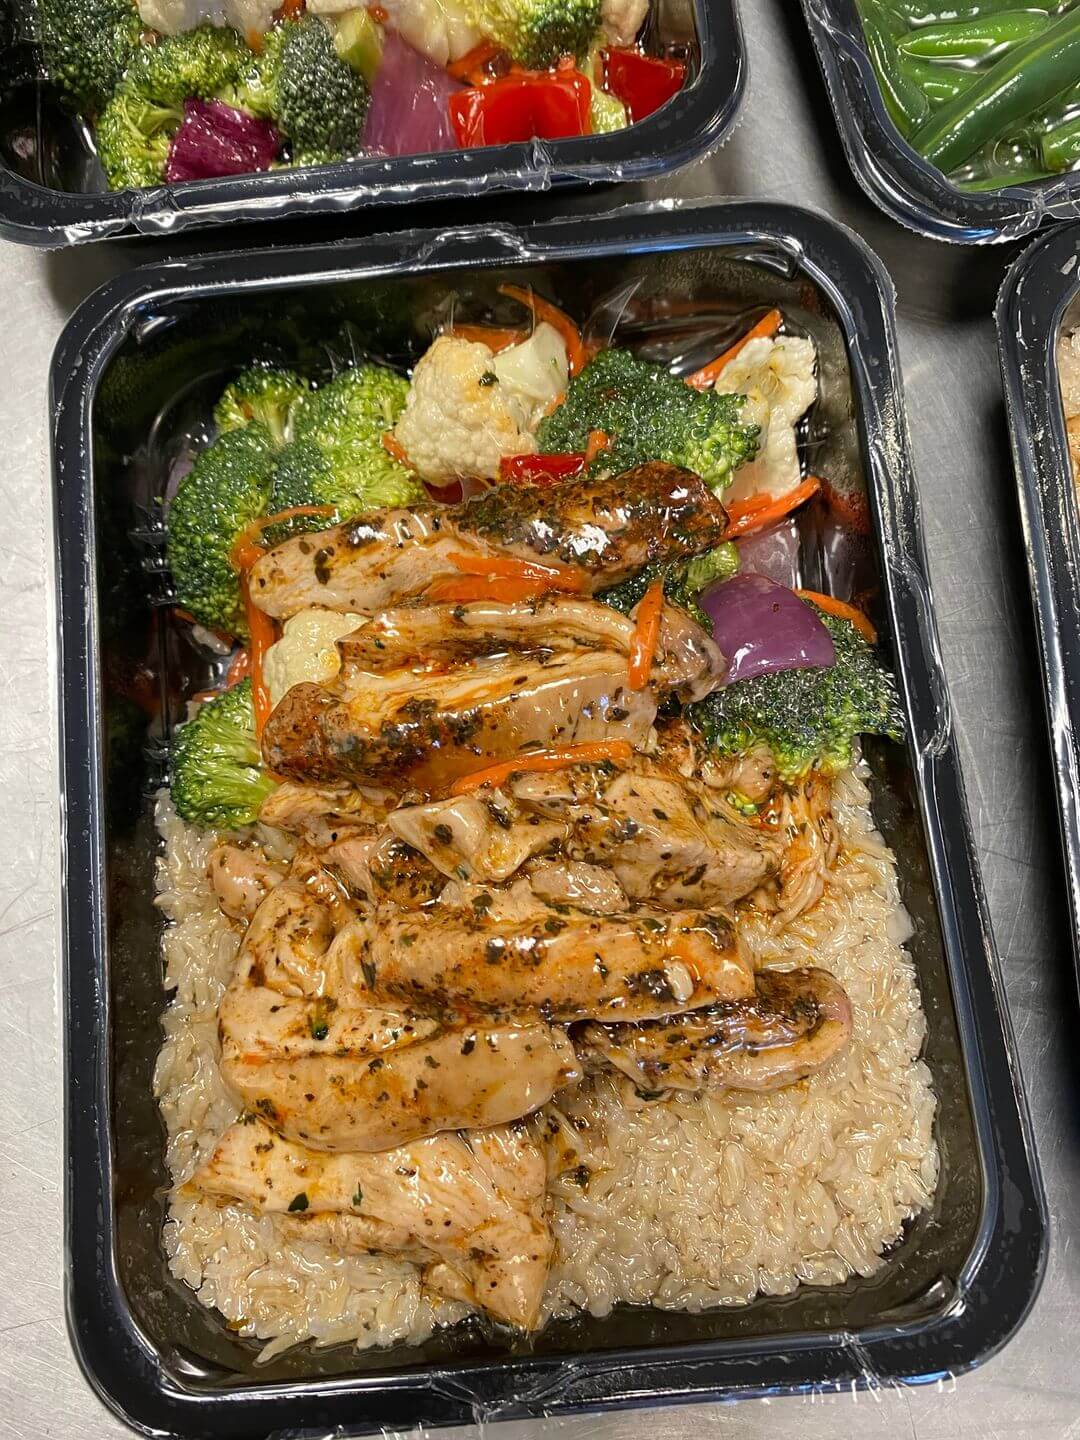 Our private label meal prep company specializes in quality and presentation.